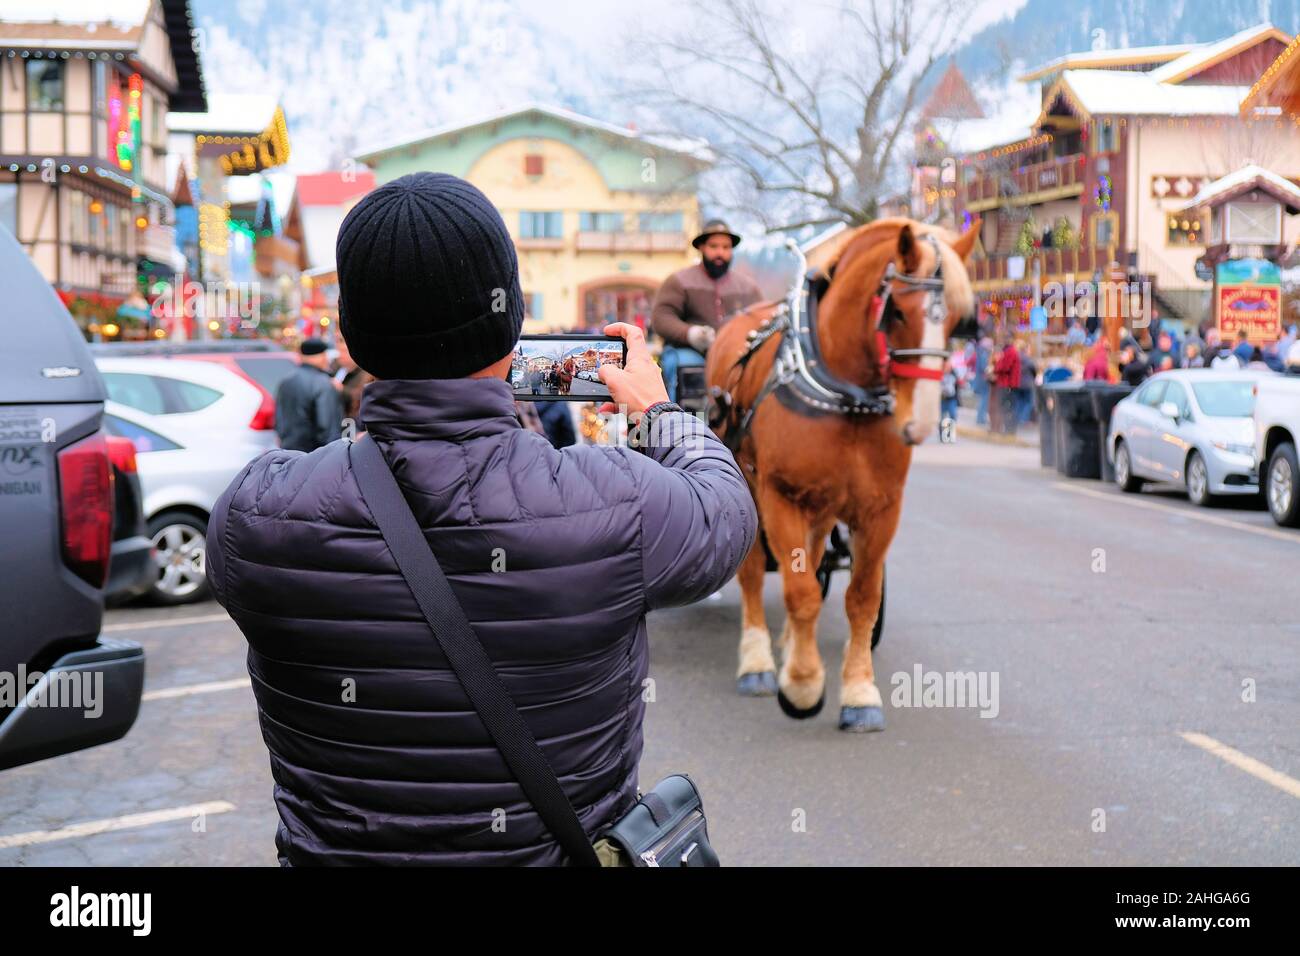 Tourist taking a cell phone picture of a horse-drawn carriage; picture within a picture, winter tourism in Leavenworth, Washington, USA. Stock Photo